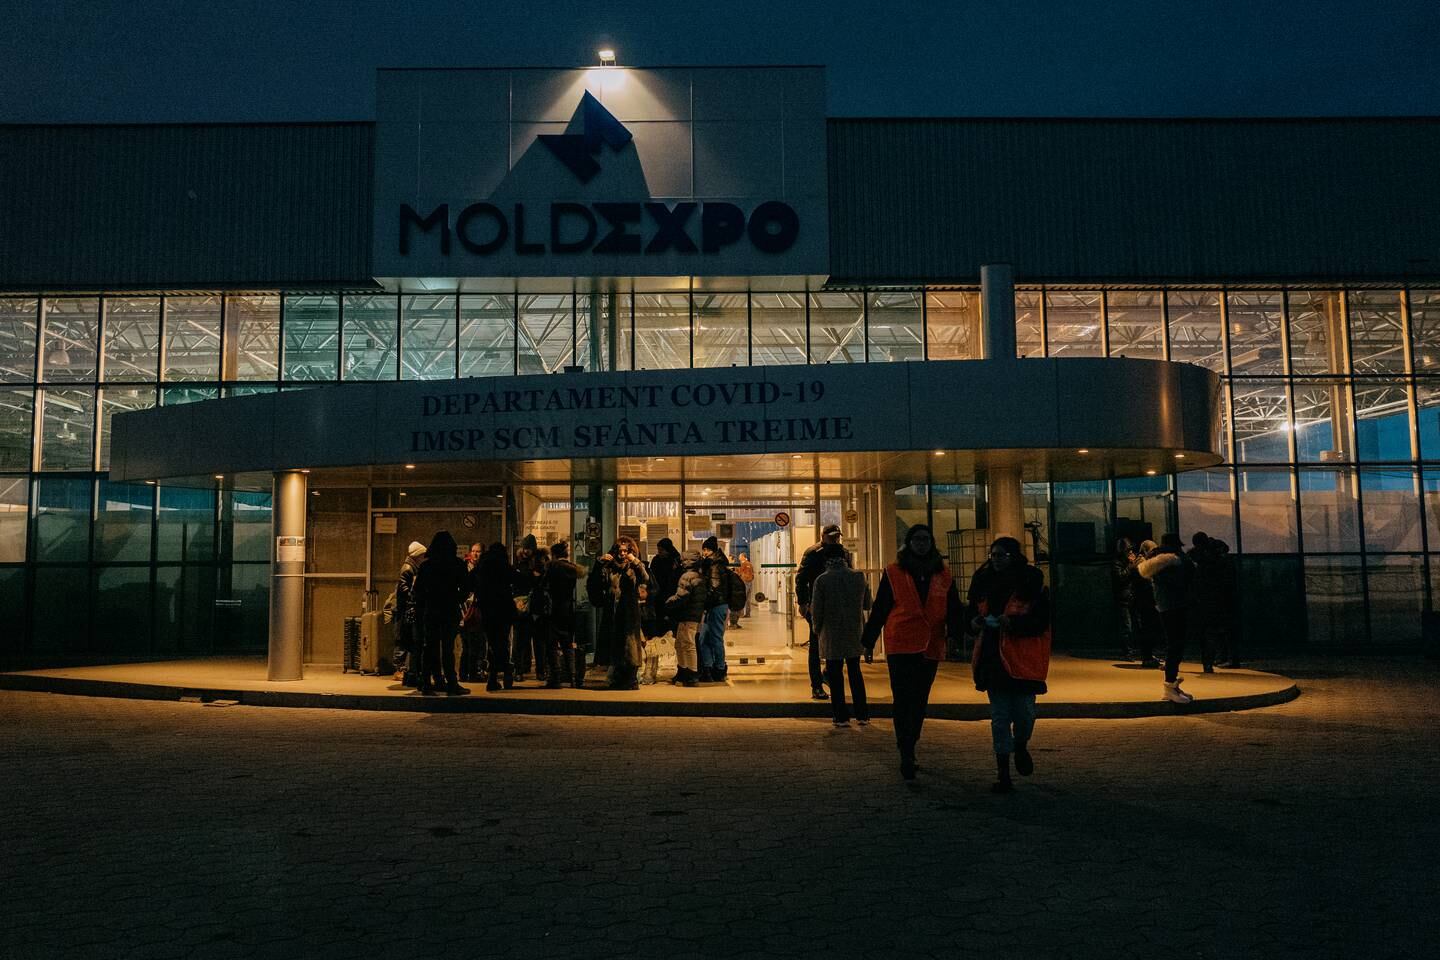 The Moldexpo center, which served as Moldova's Covid-19 hospital, was transformed into a refugee center in 6 hours on the first day of the war. Photo: Erin Clare Brown / The National